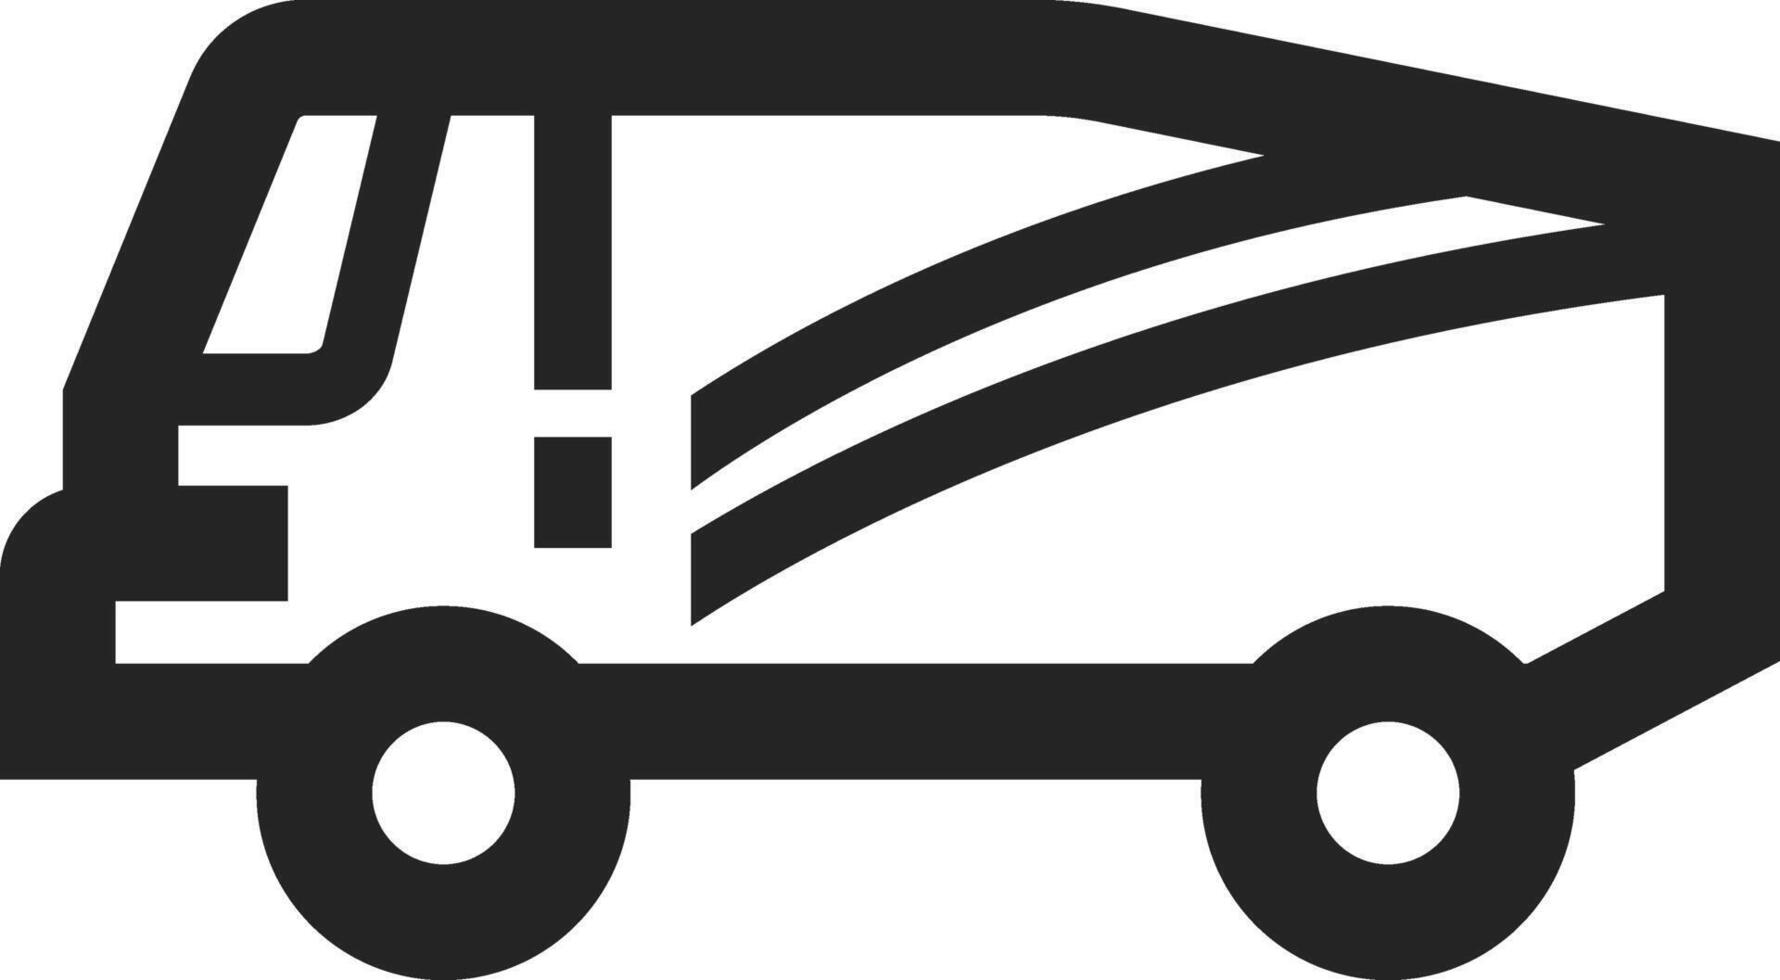 Rally truck icon in thick outline style. Black and white monochrome vector illustration